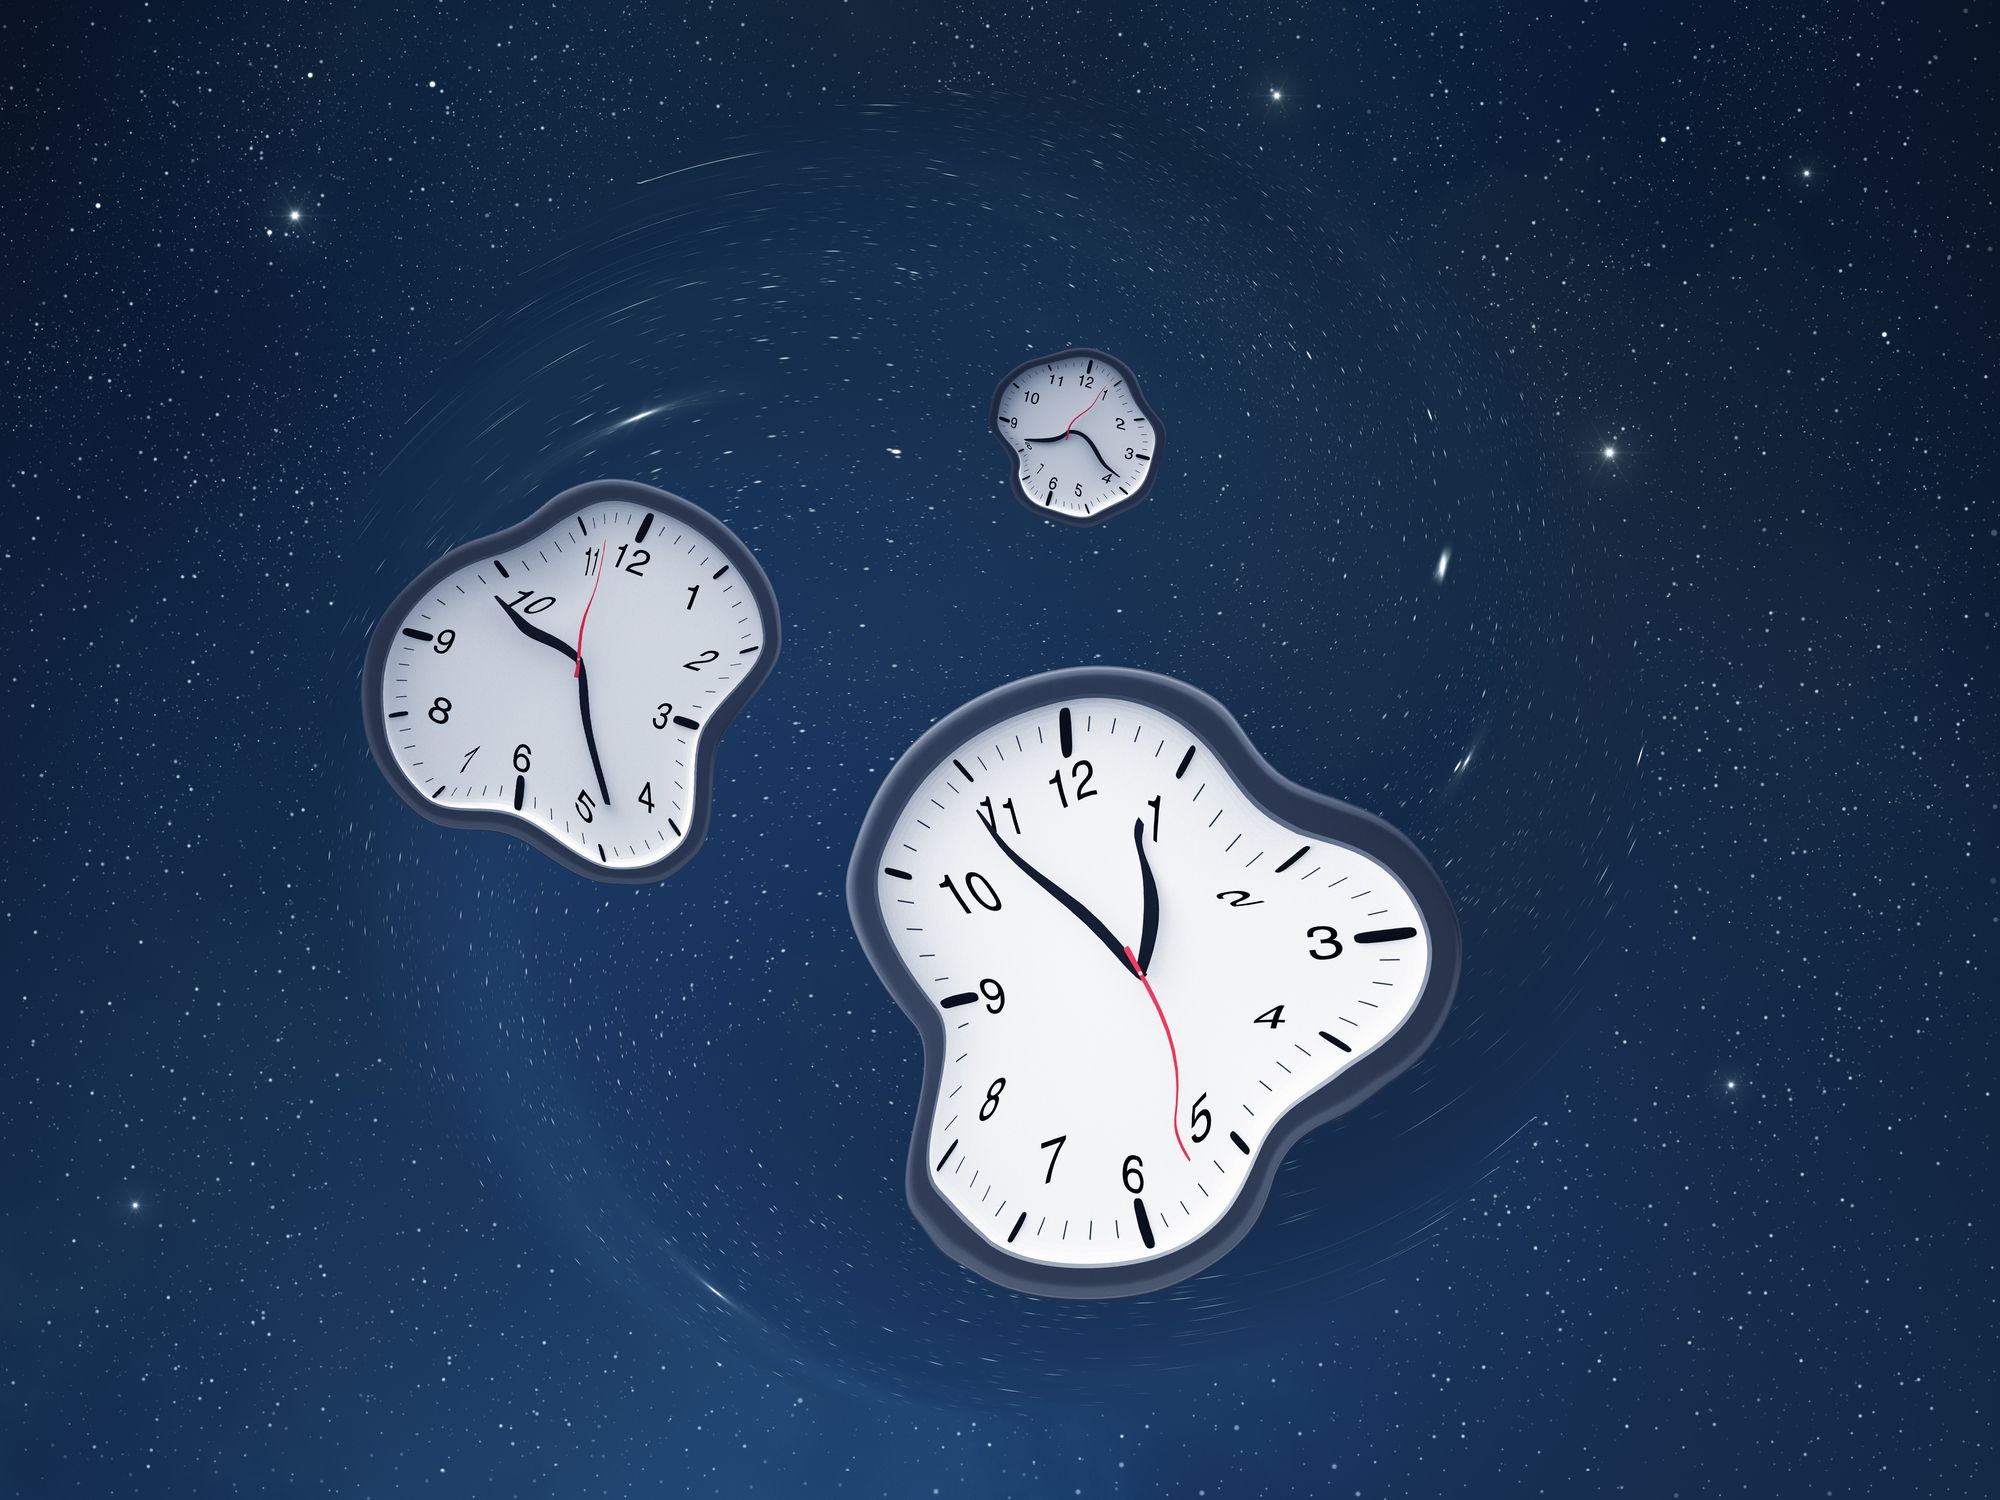 https://hips.hearstapps.com/hmg-prod/images/three-distorted-clocks-of-different-times-in-the-royalty-free-image-1686693483.jpg